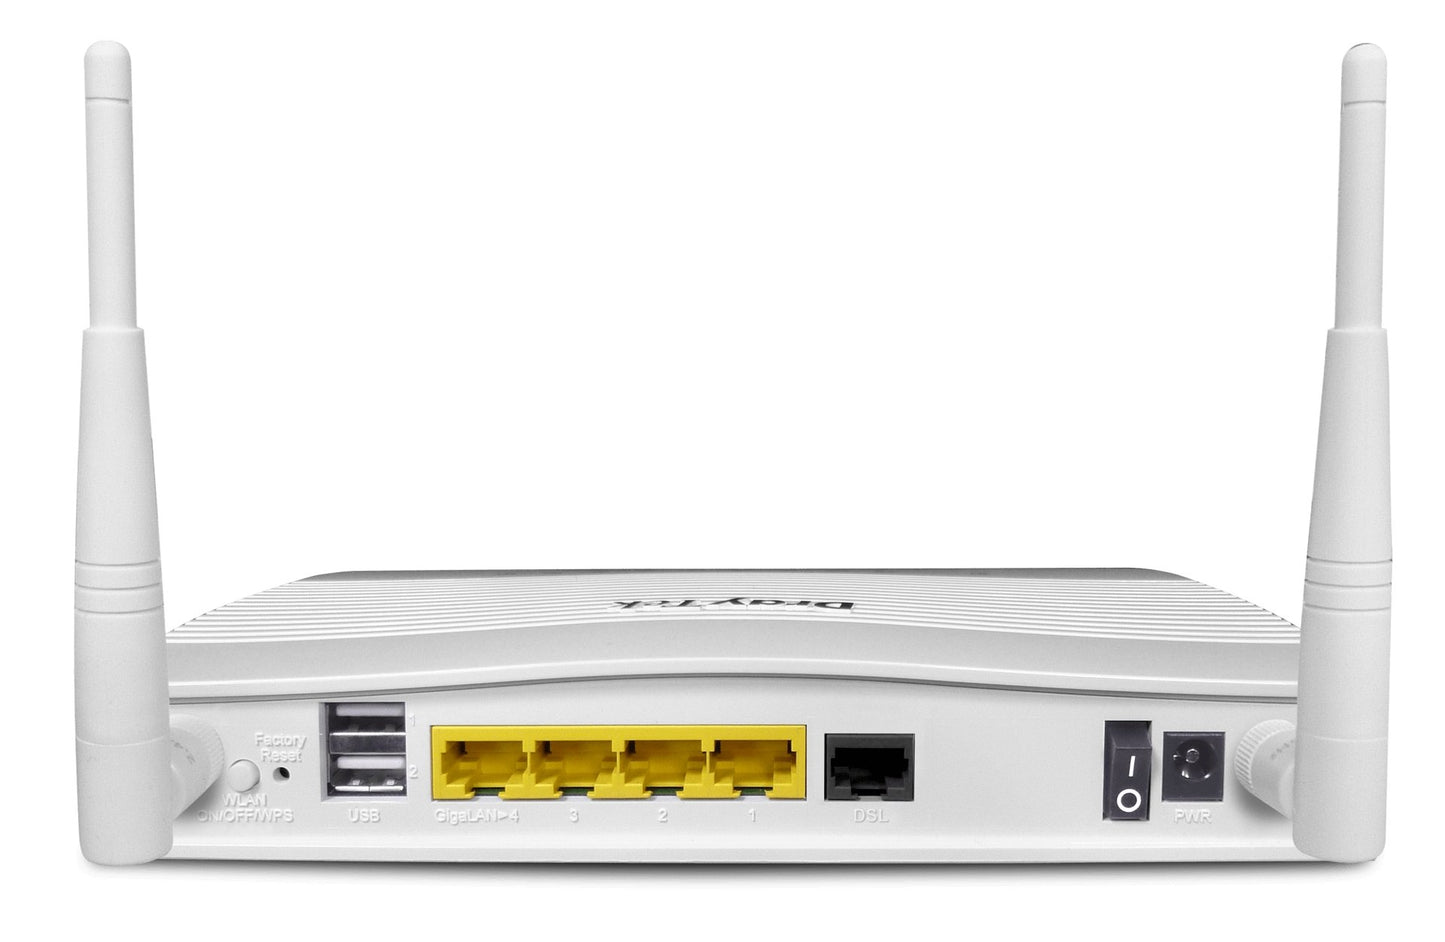 DrayTek Vigor 2763ac VDSL and Ethernet Router with AC1300 Wave 2 Wireless Rear View Showing Port Description